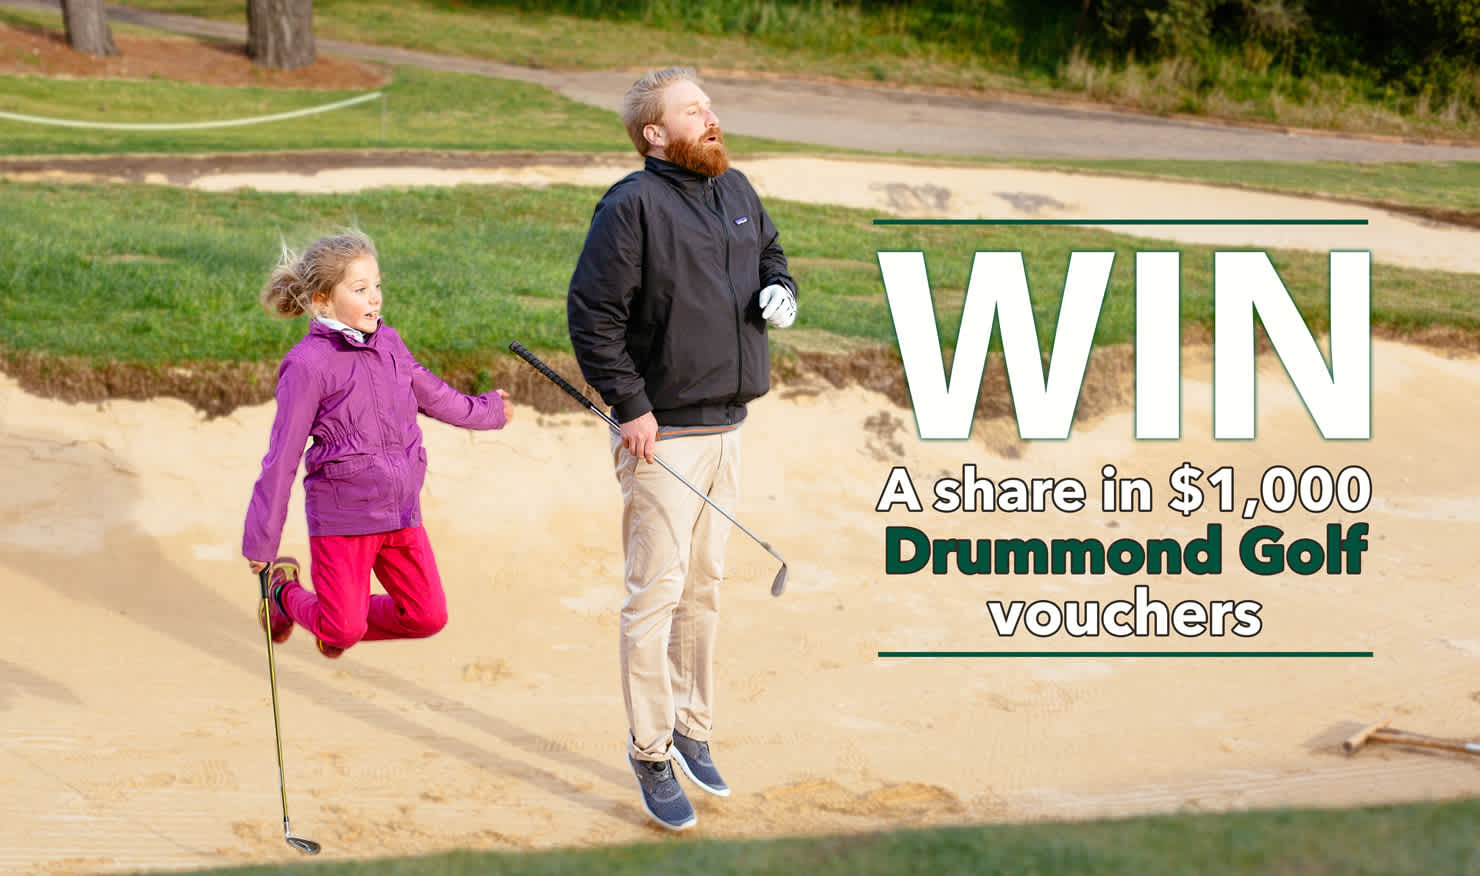 Win a share in $1,000 worth of Drummond Golf vouchers.